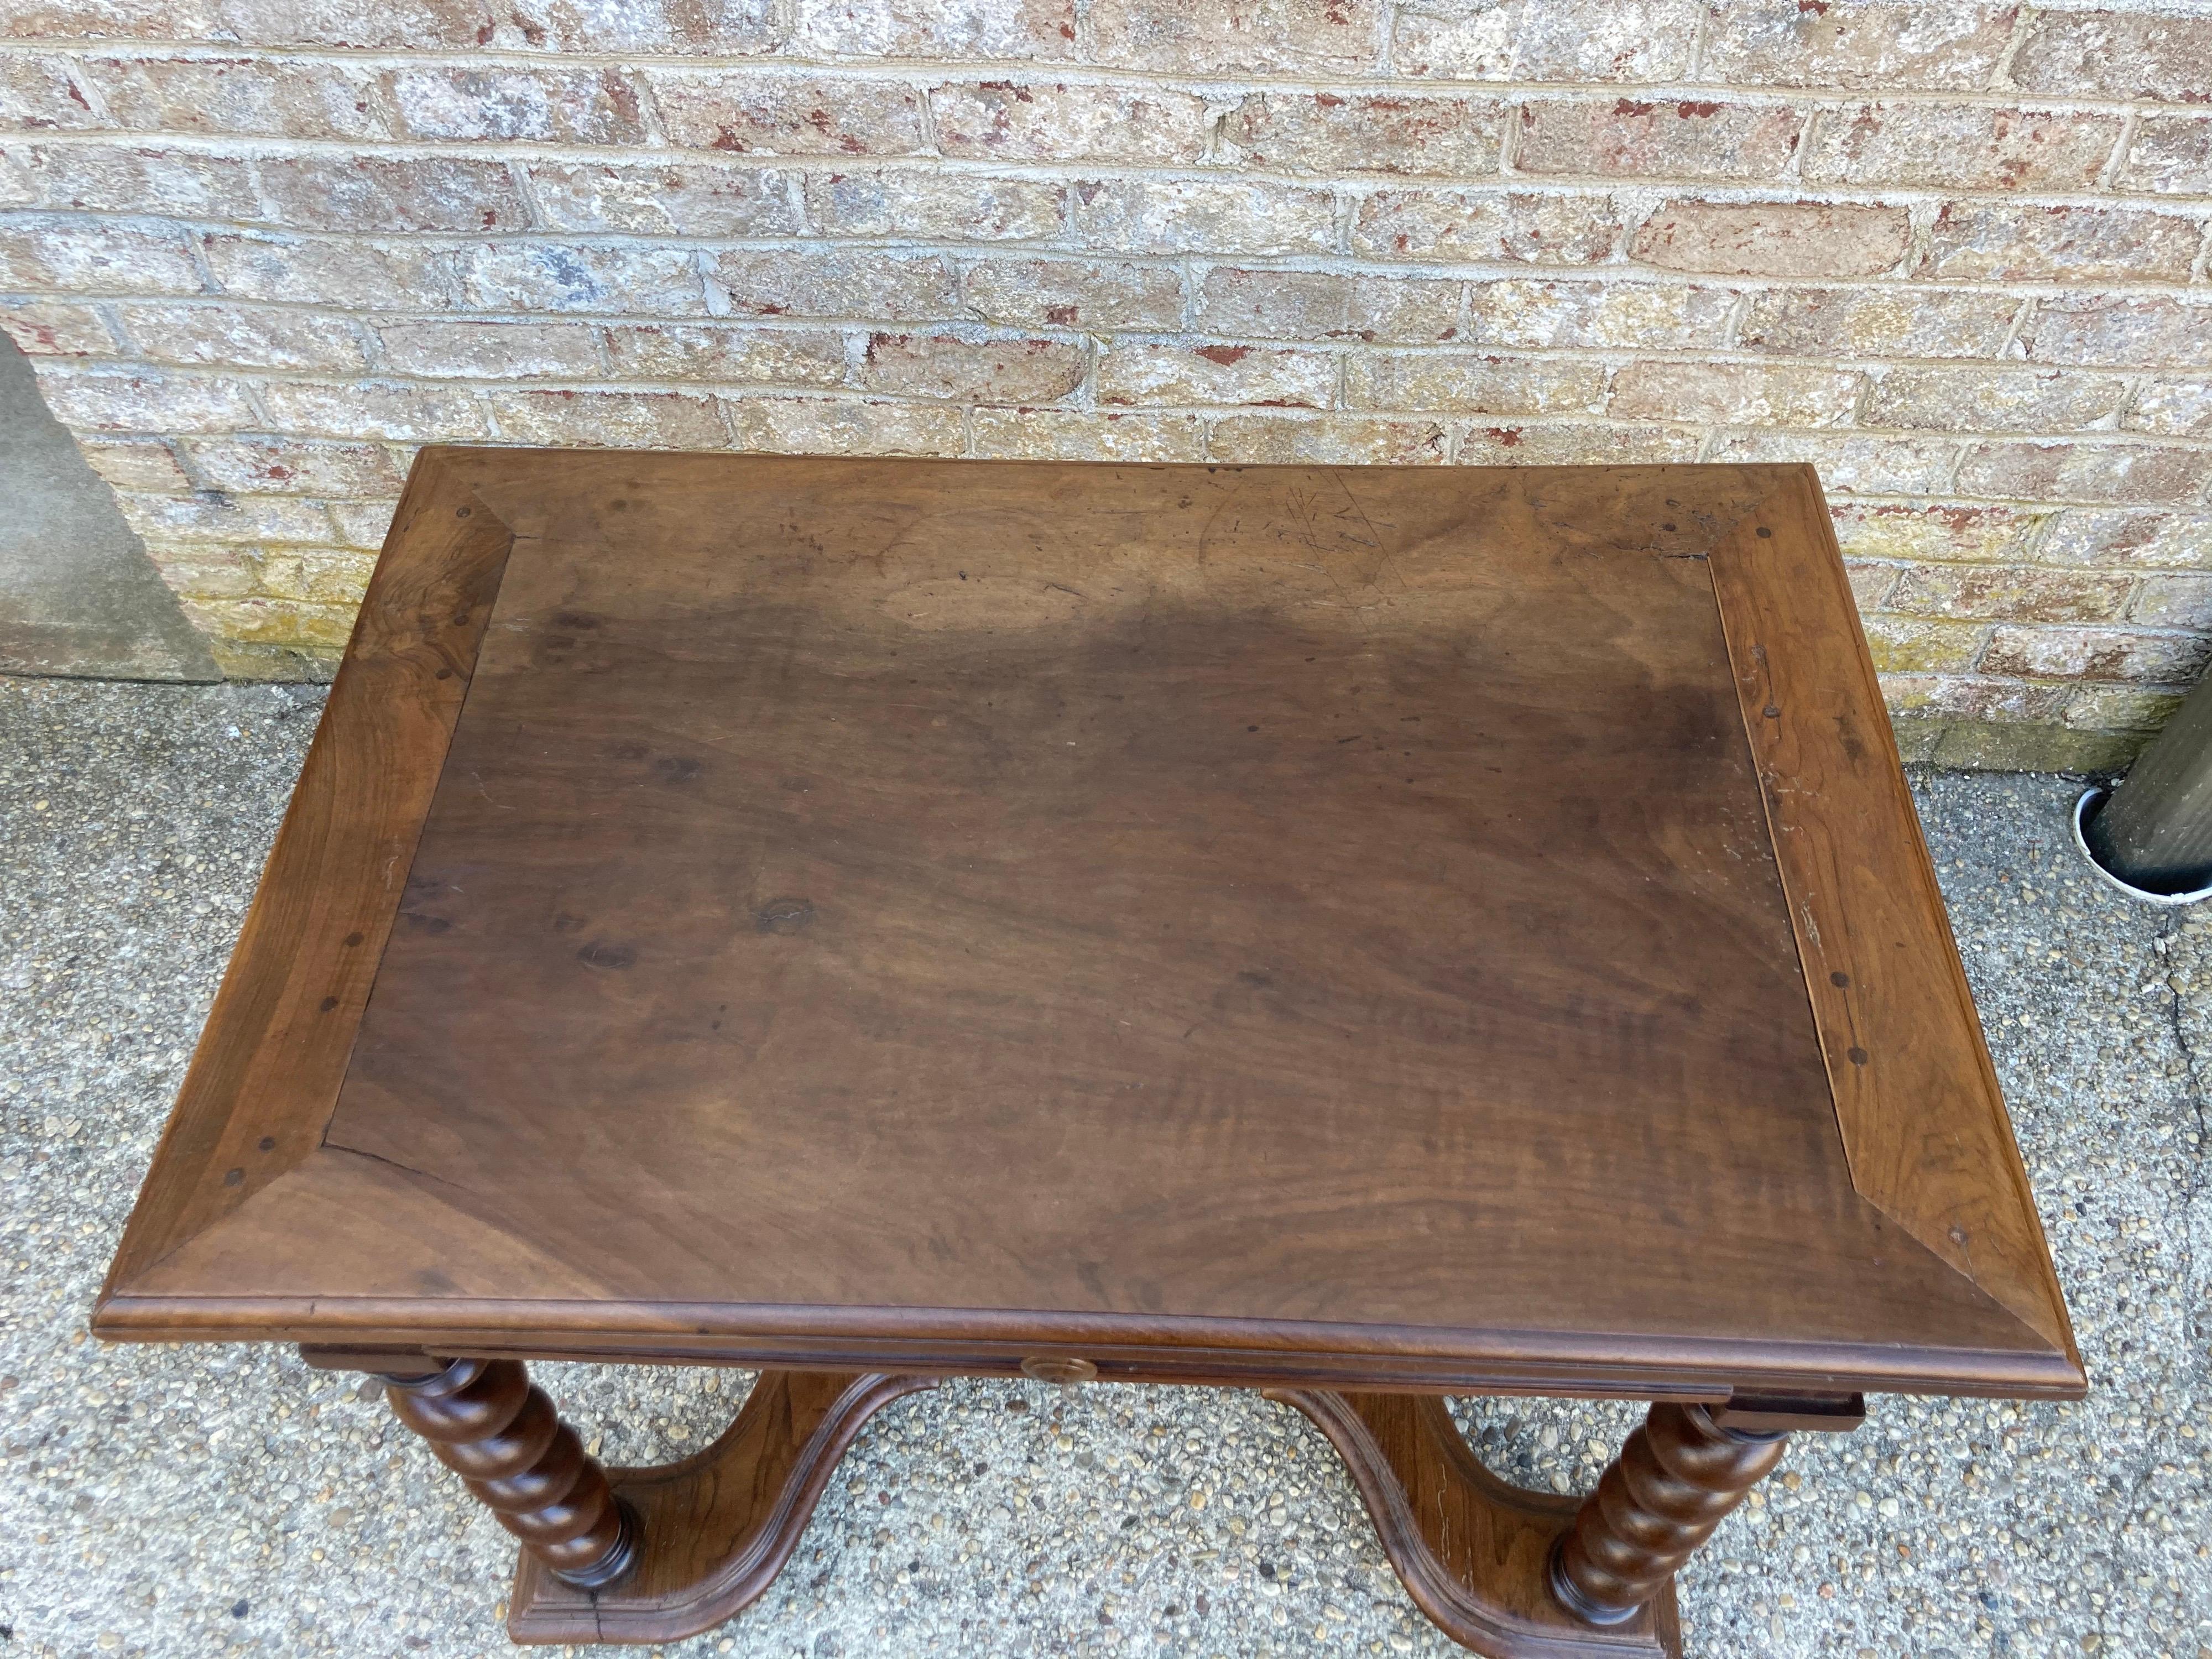 Wonderful walnut table with turned legs and a single drawer.... a great night stand for a King bed.